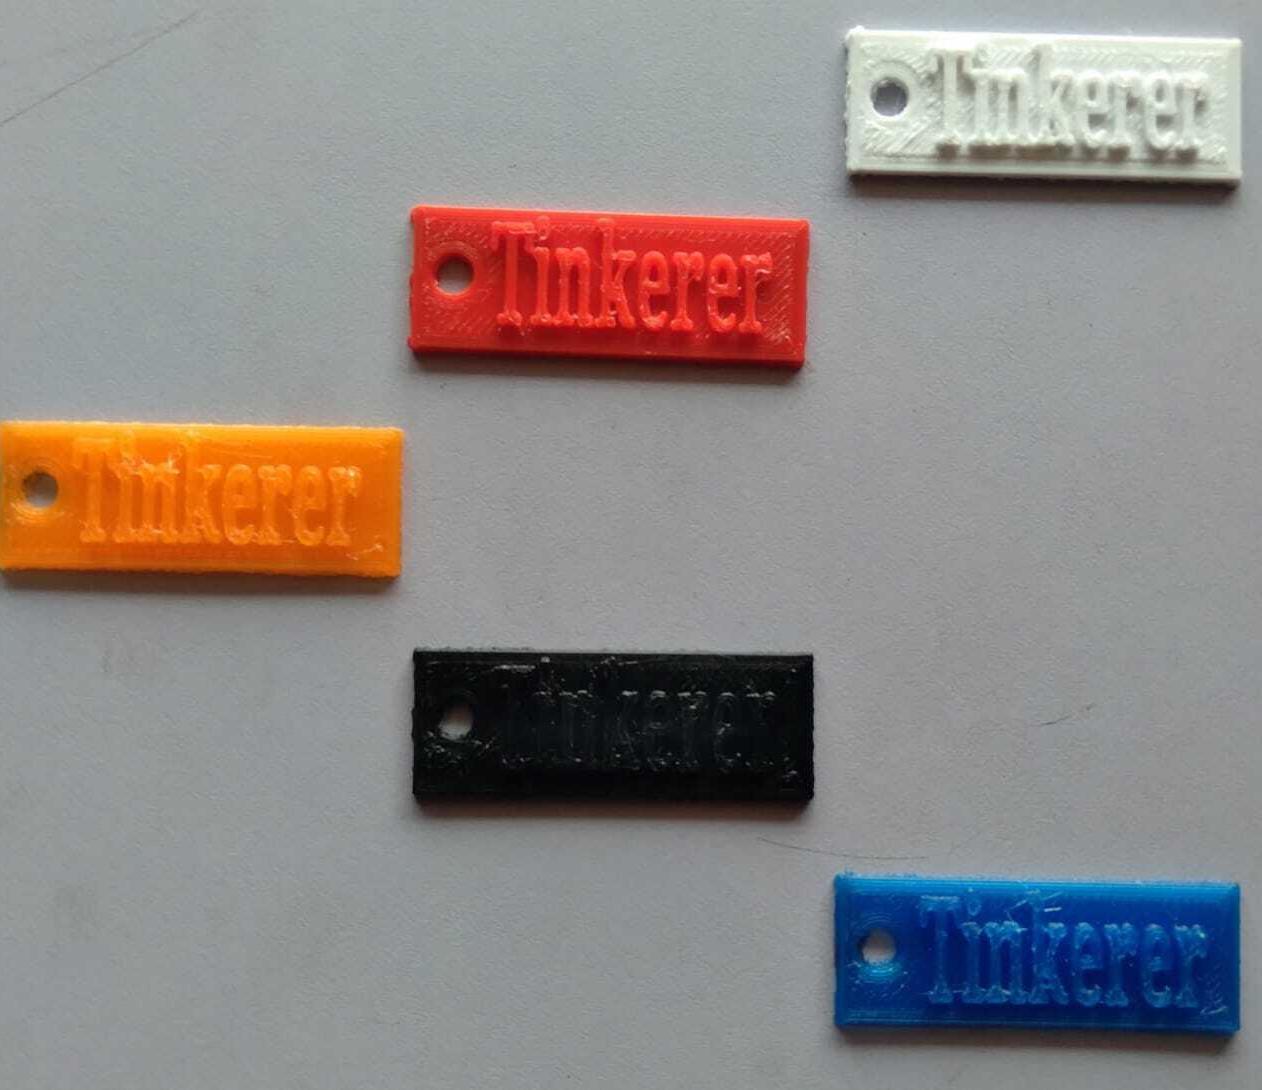 The Project Is Making Key Chain of the Students Name Using Tinkercad.